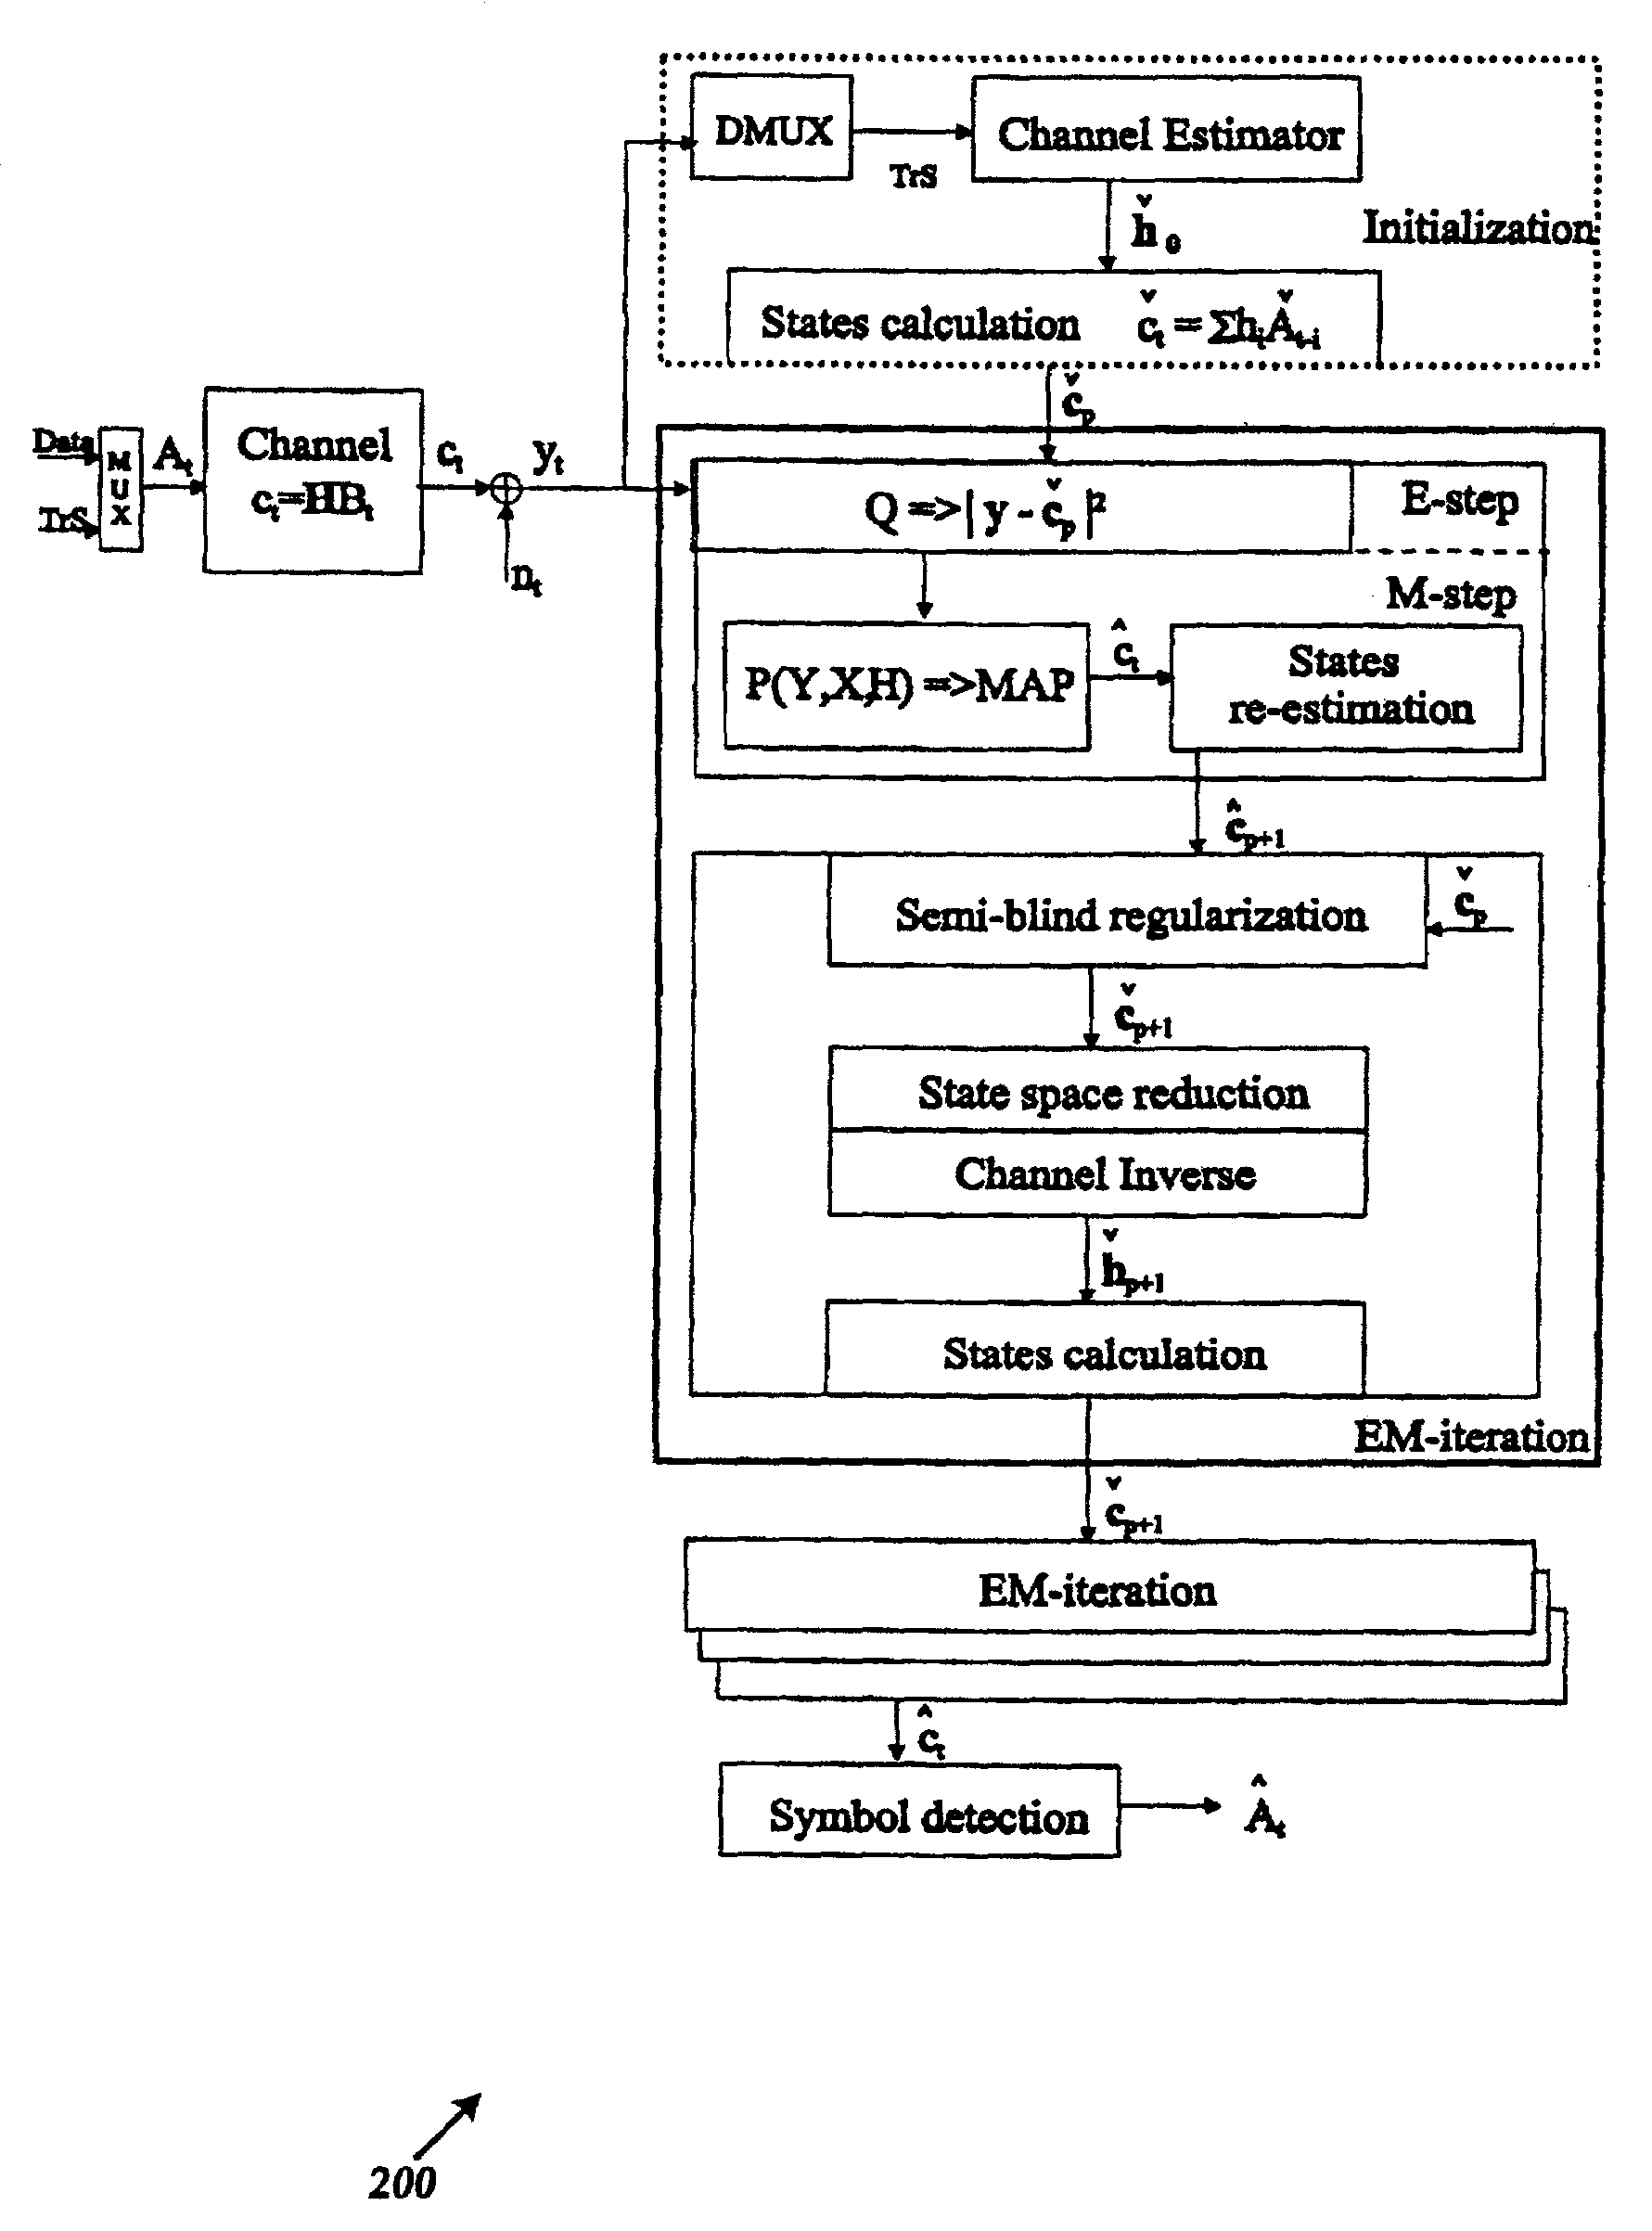 Method and system for channel estimation using iterative estimation and detection